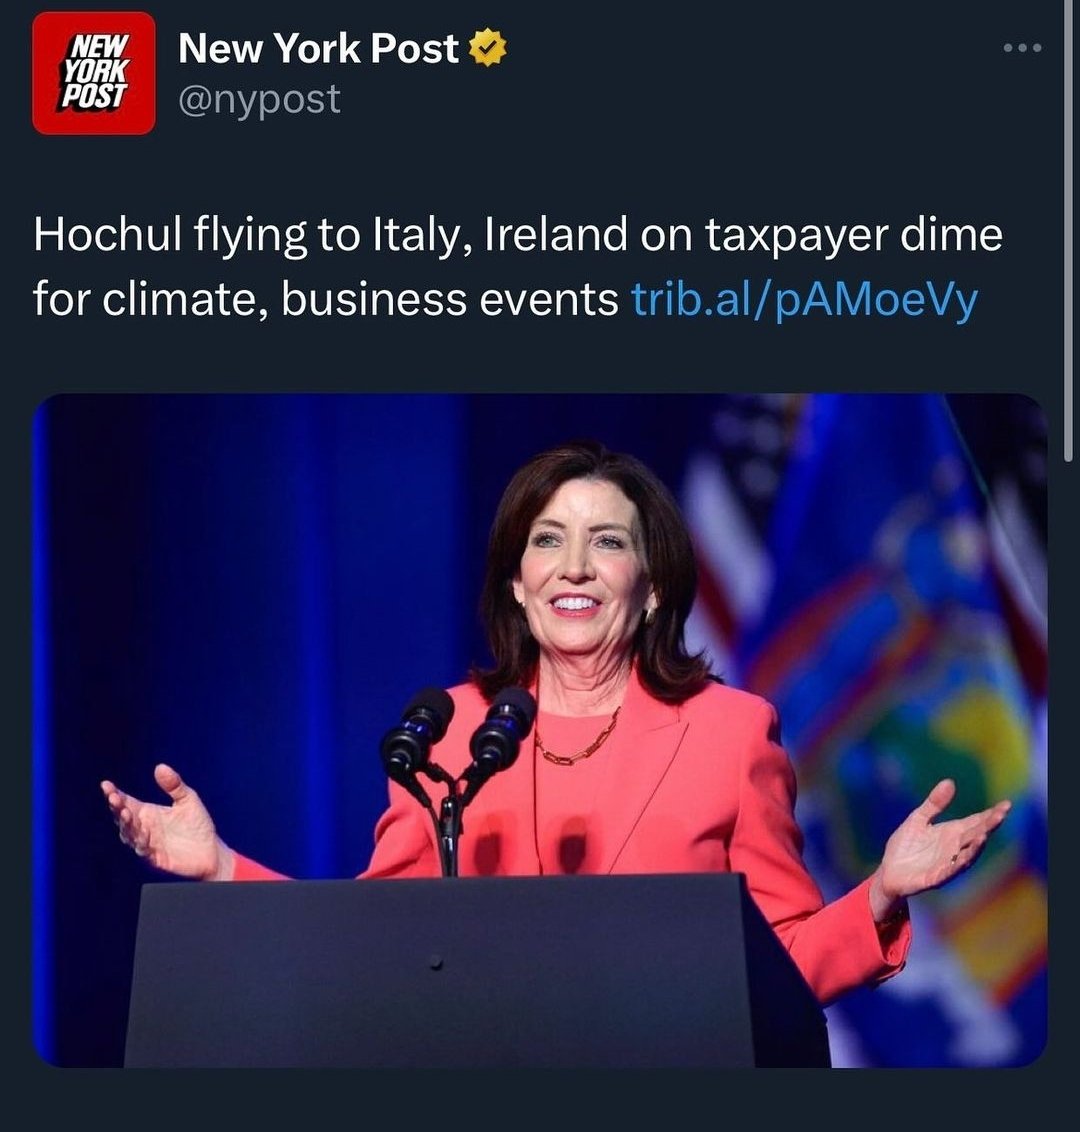 Hochul claims black kids in her state don't even know what a computer is... So it makes perfect sense that she's taking a European vacation under the guise of 'climate change,' now...